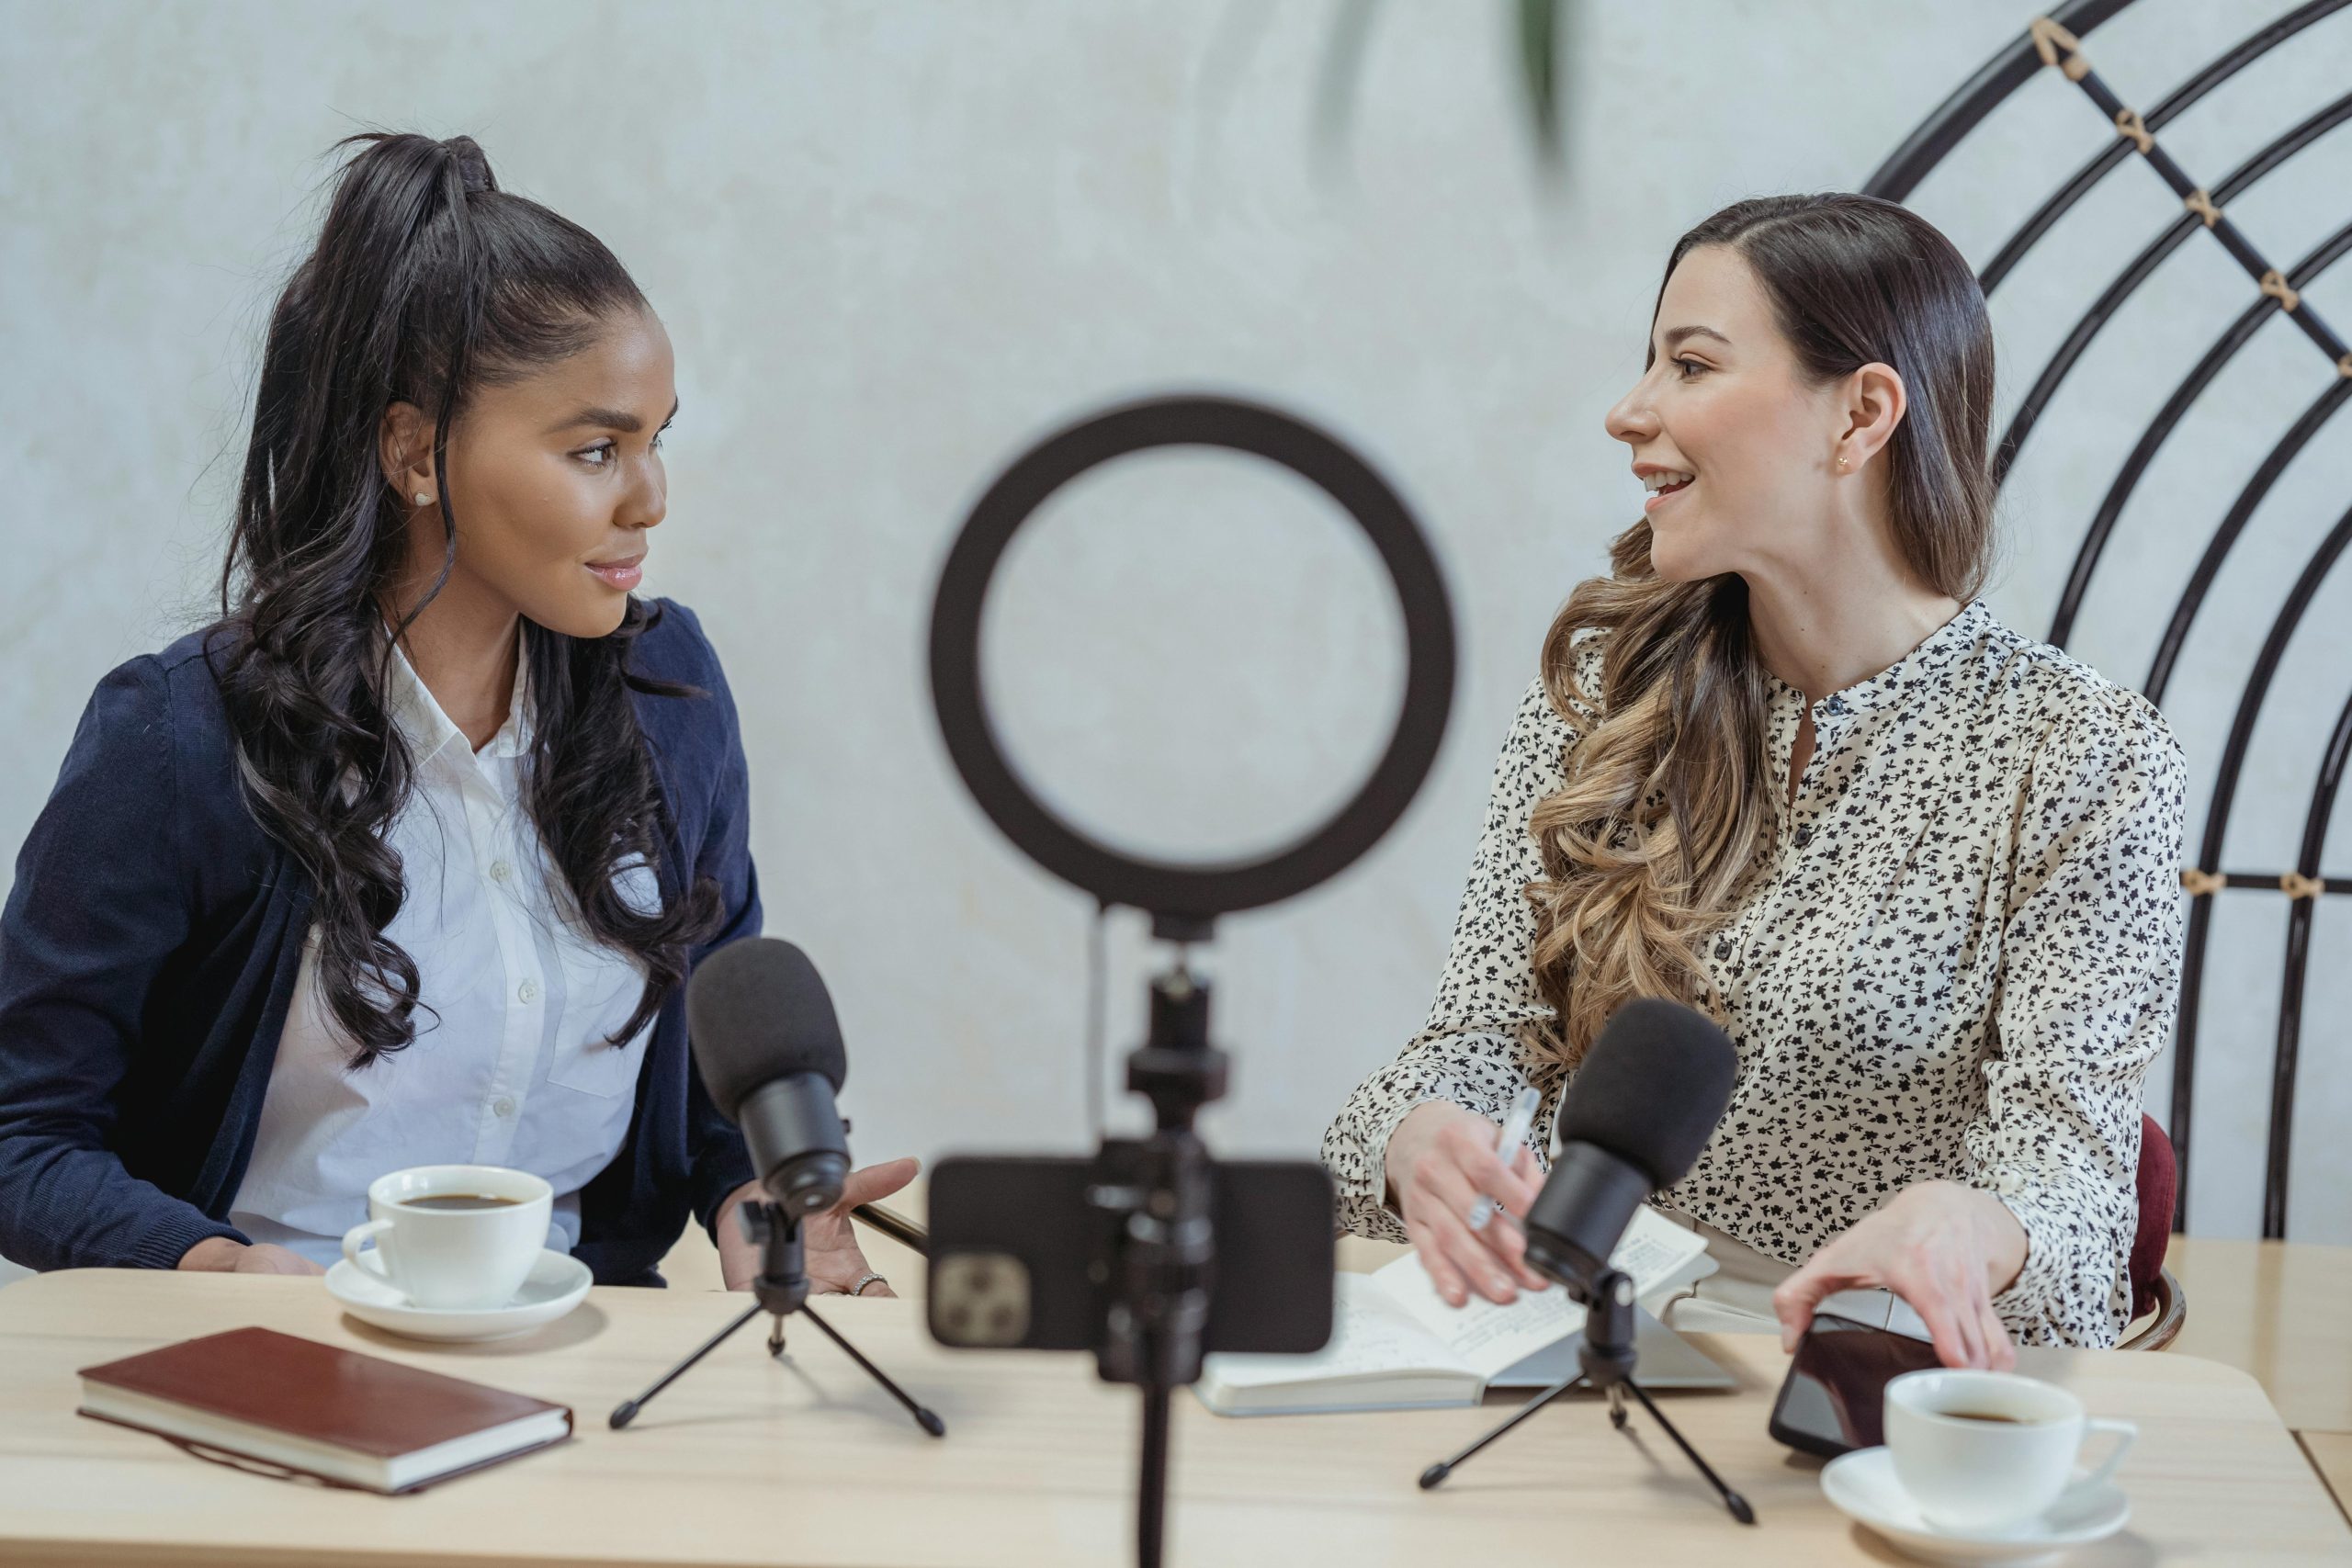 Two women sitting at a table, holding microphones, engaged in conversation over cups of coffee.